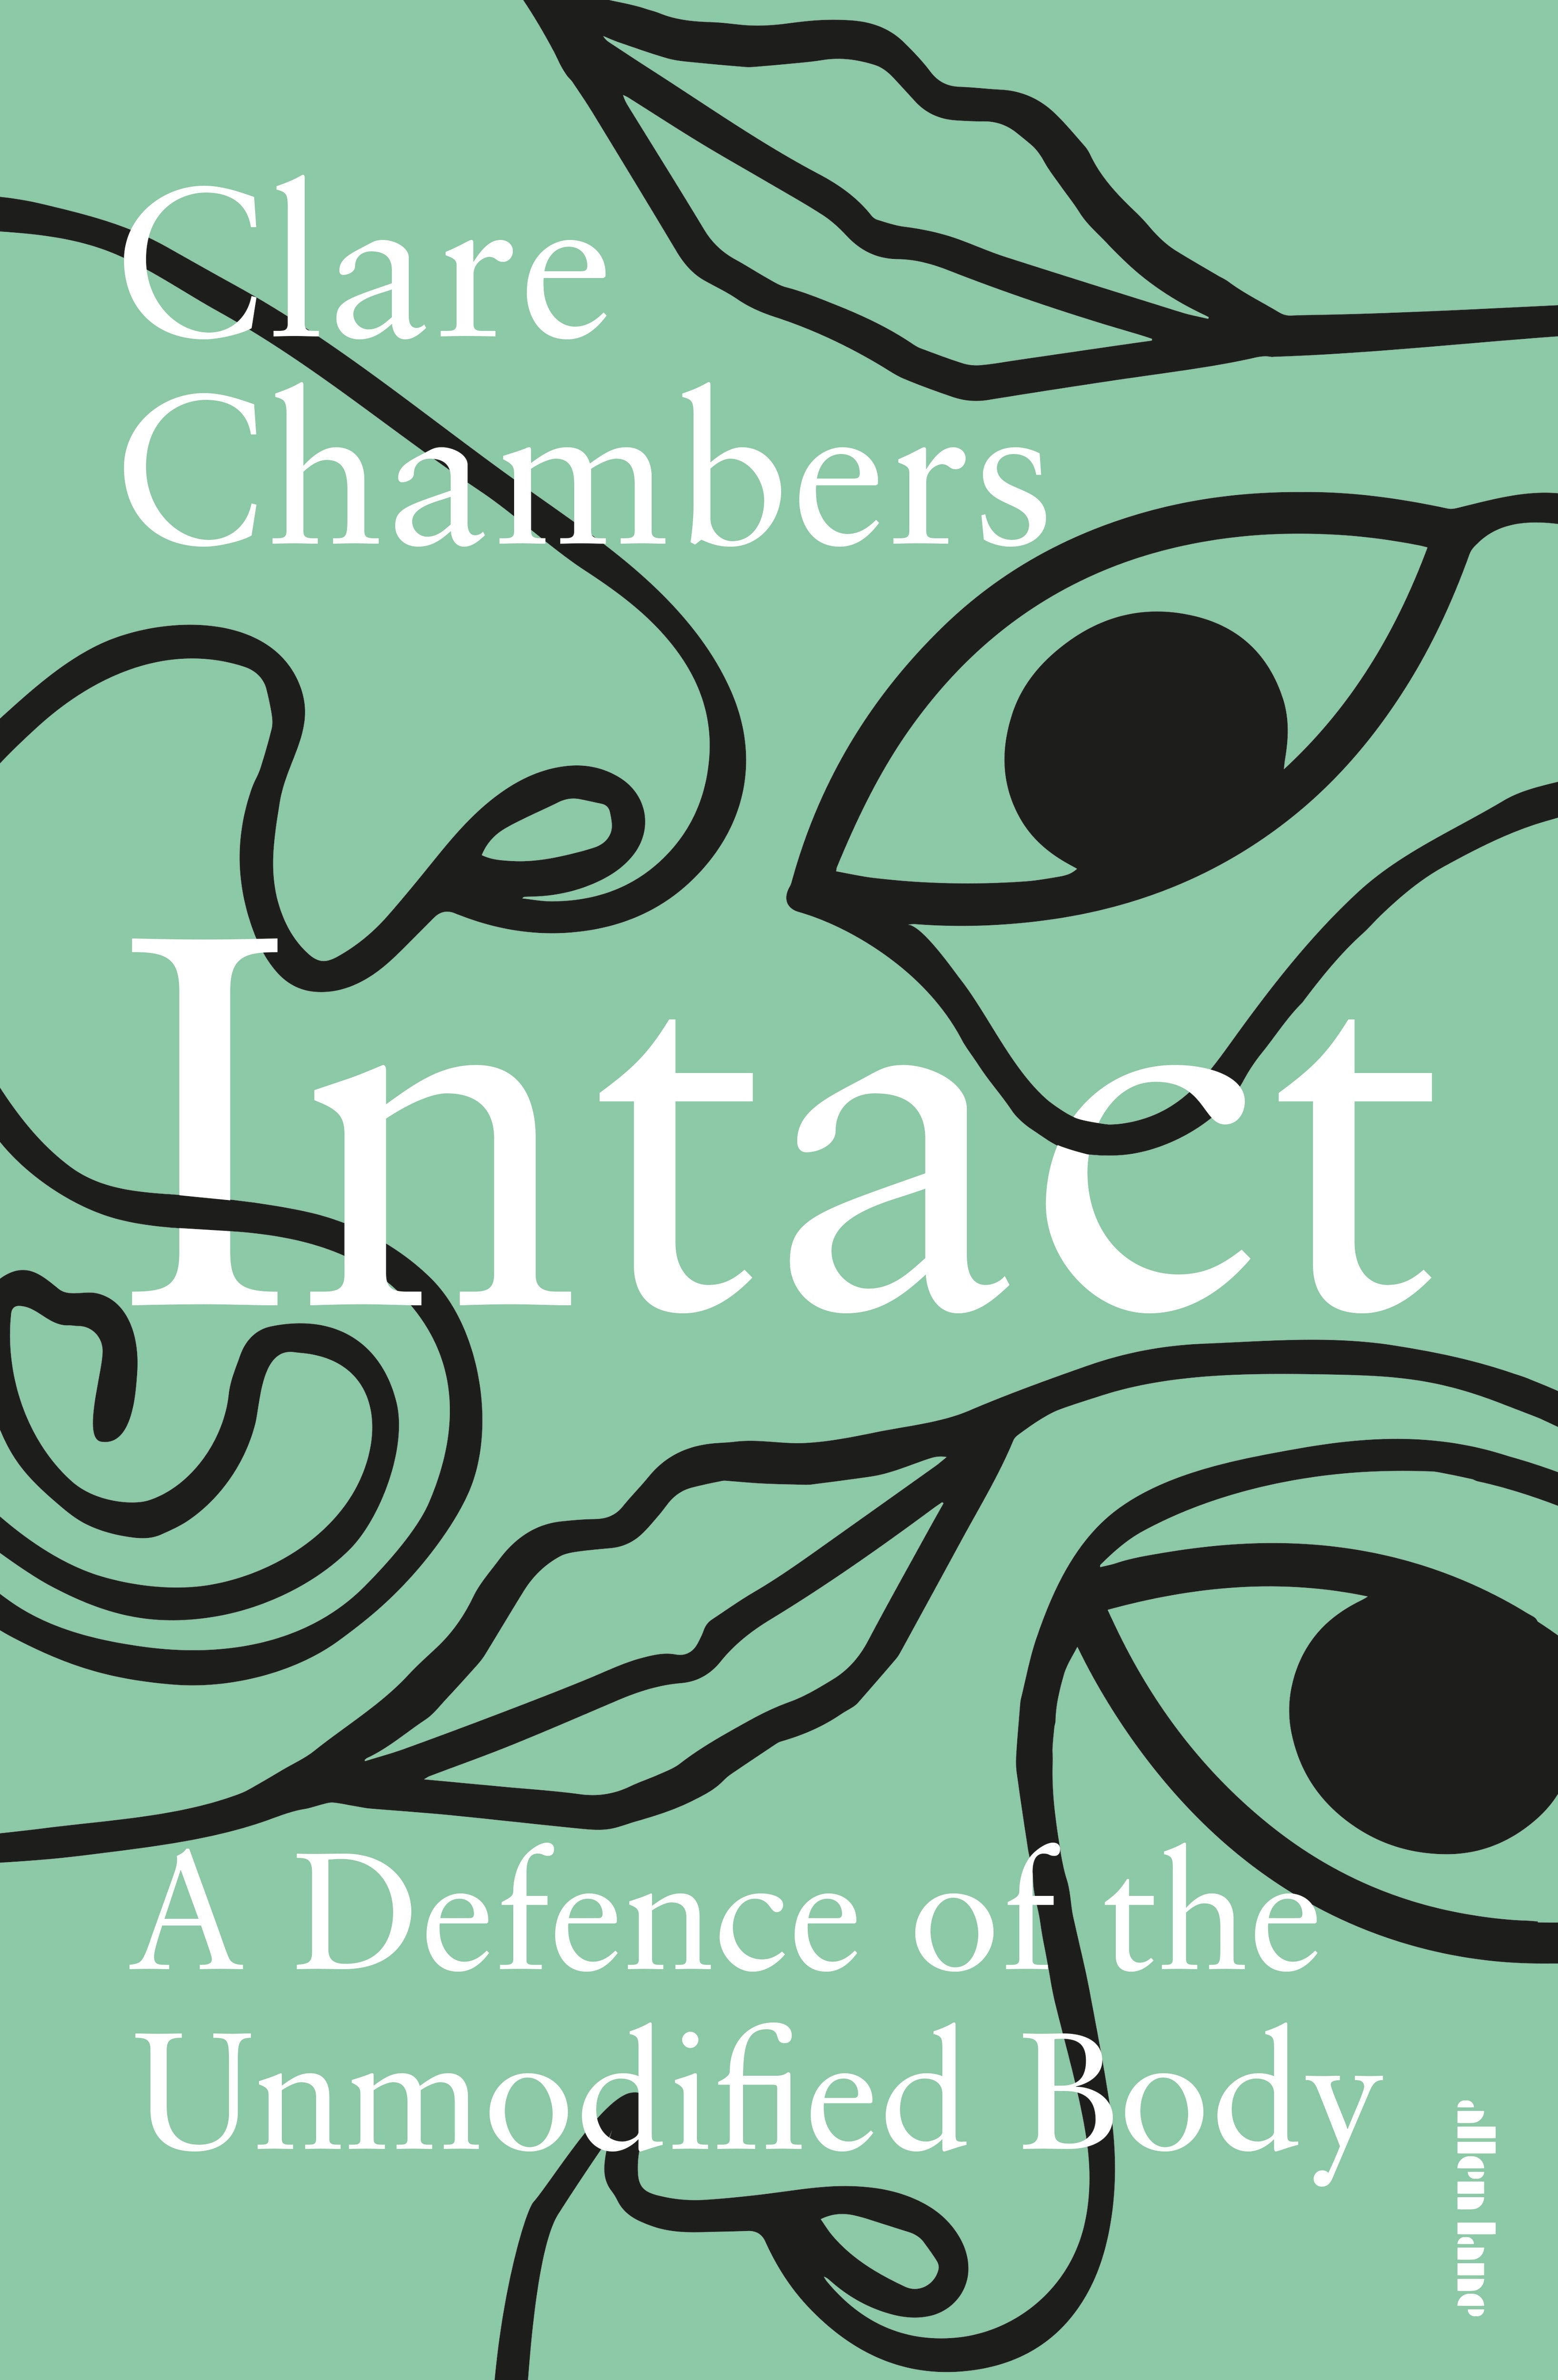 Book “Intact” by Clare Chambers — February 24, 2022